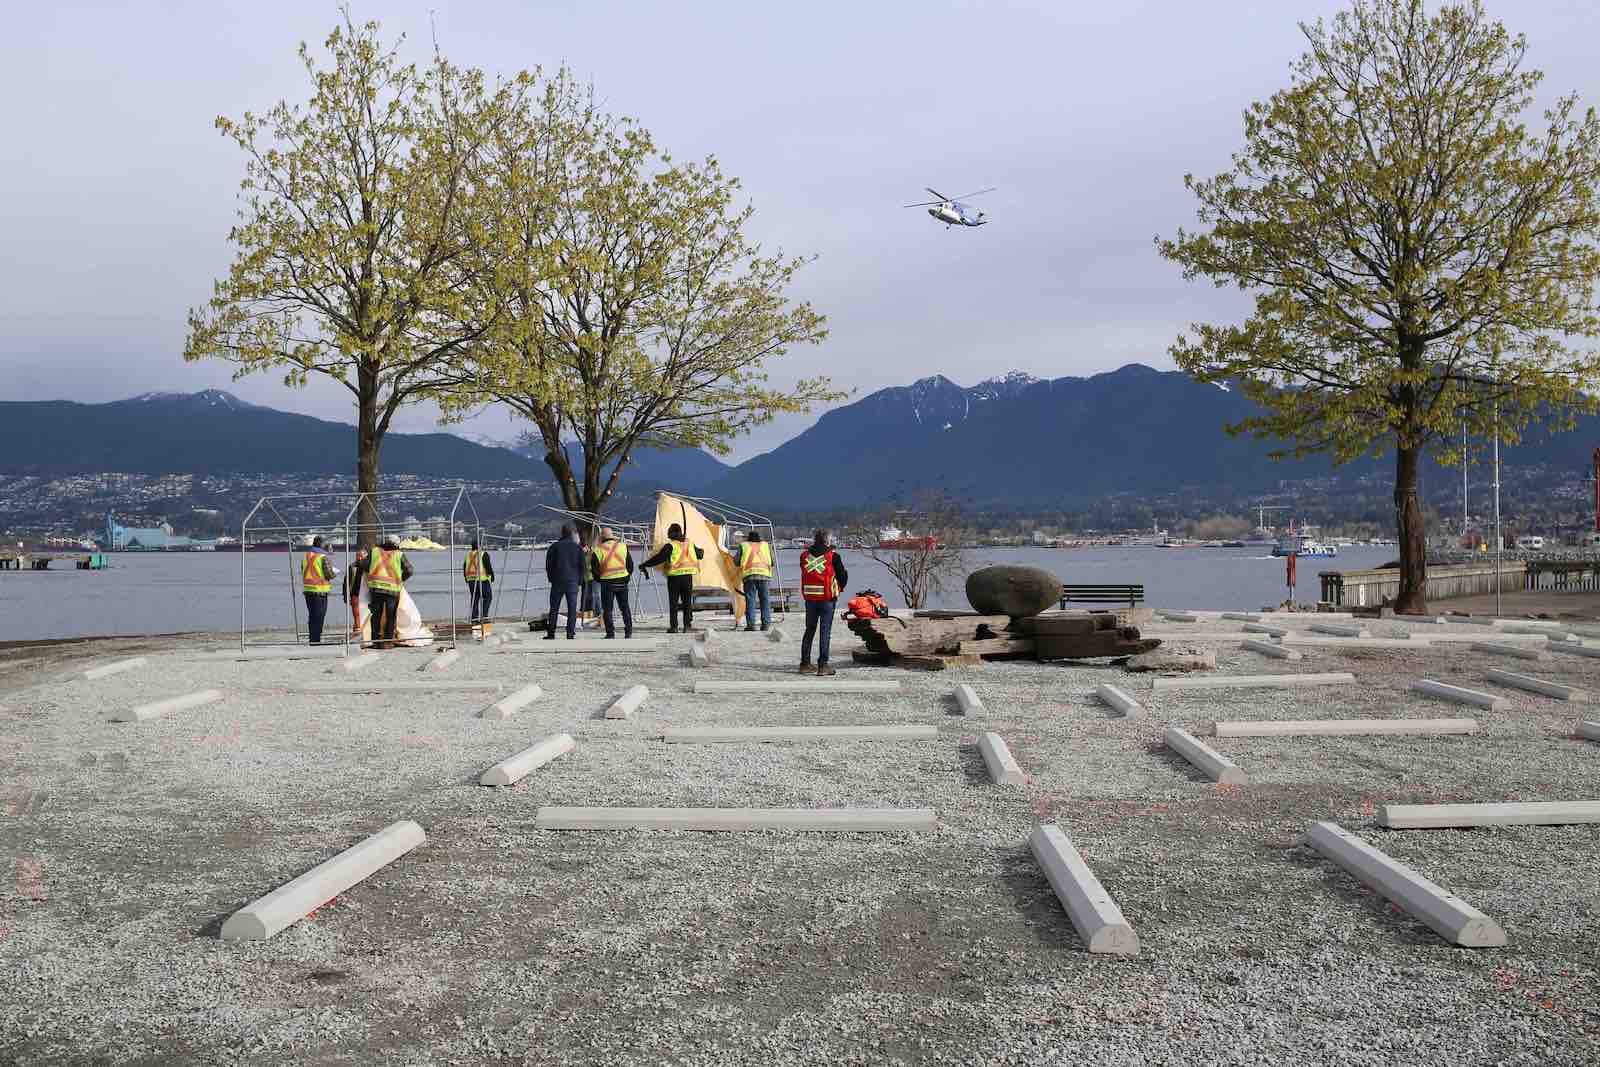 About 10 workers in safety vests stand in a gravel-covered space with low concrete barriers marking tent sites. They are in front of Burrard Inlet.